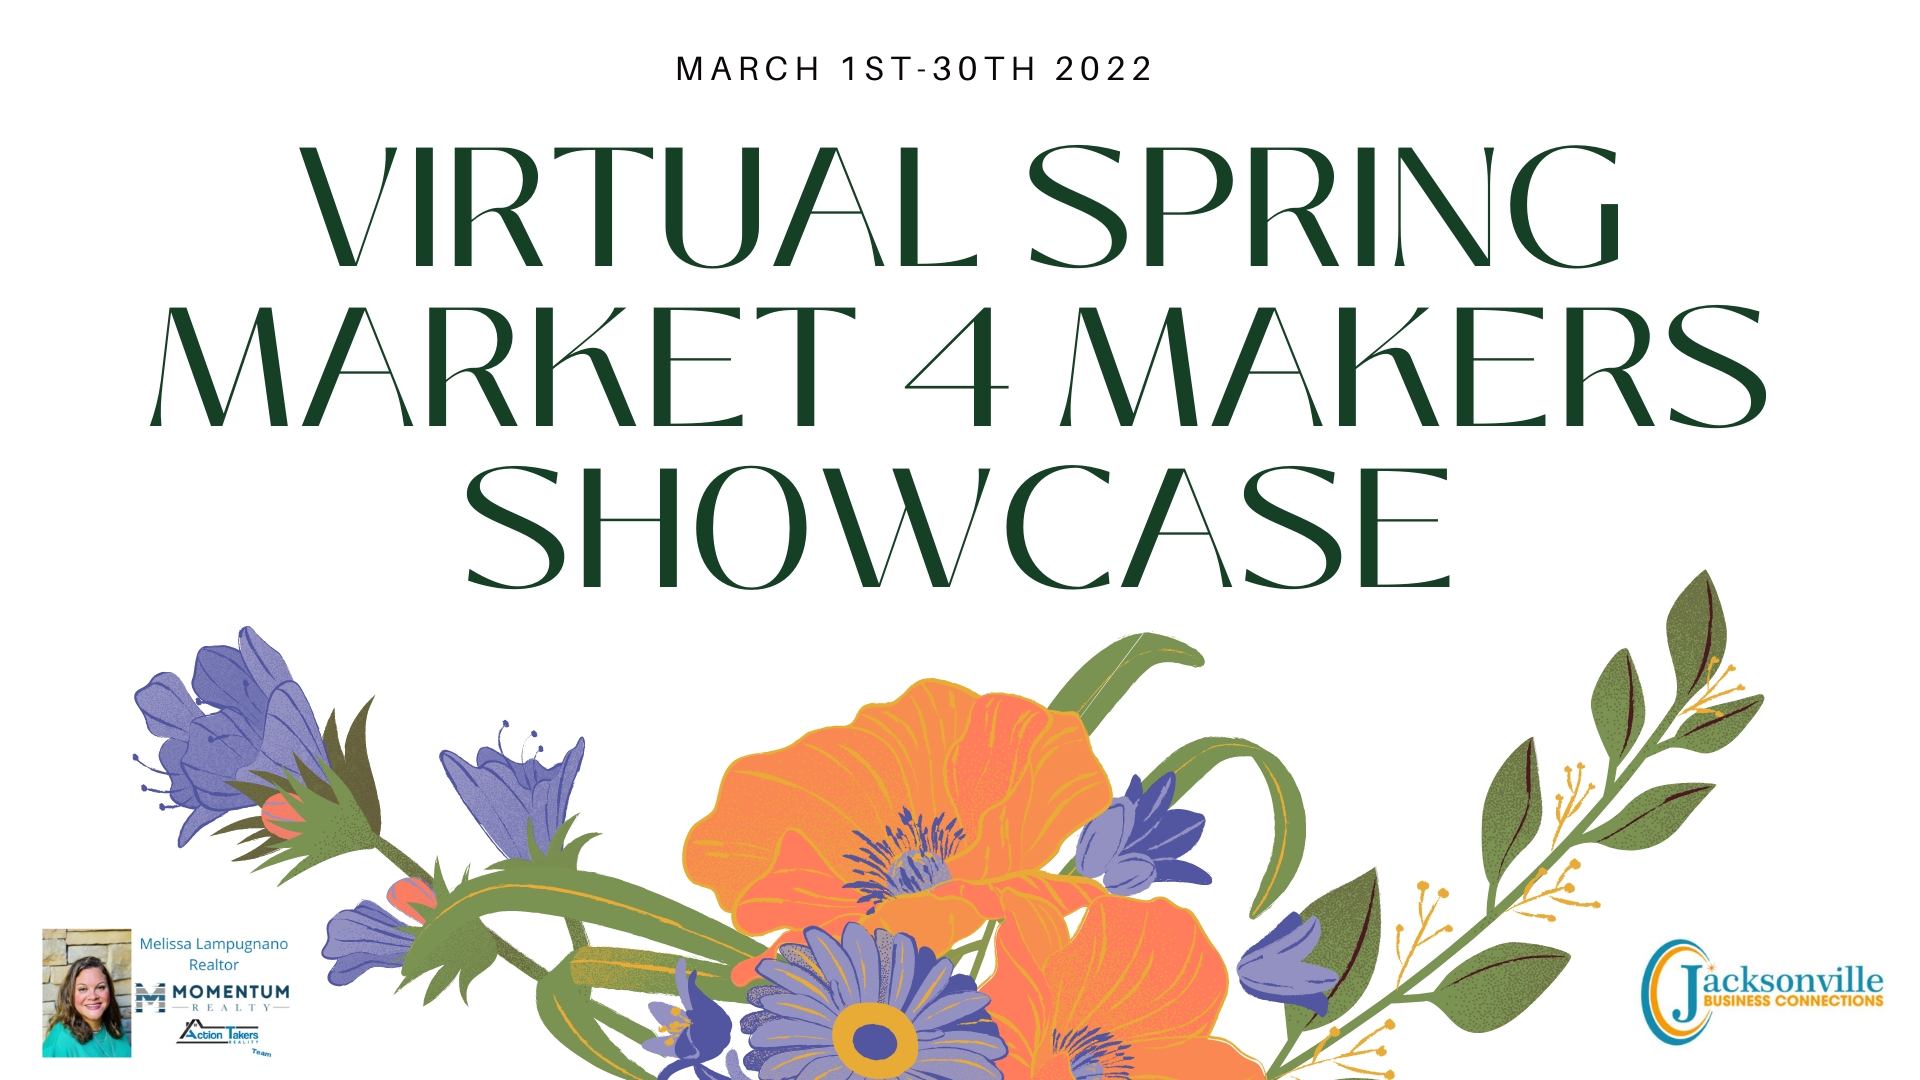 Virtual Spring Market 4 Makers cover image